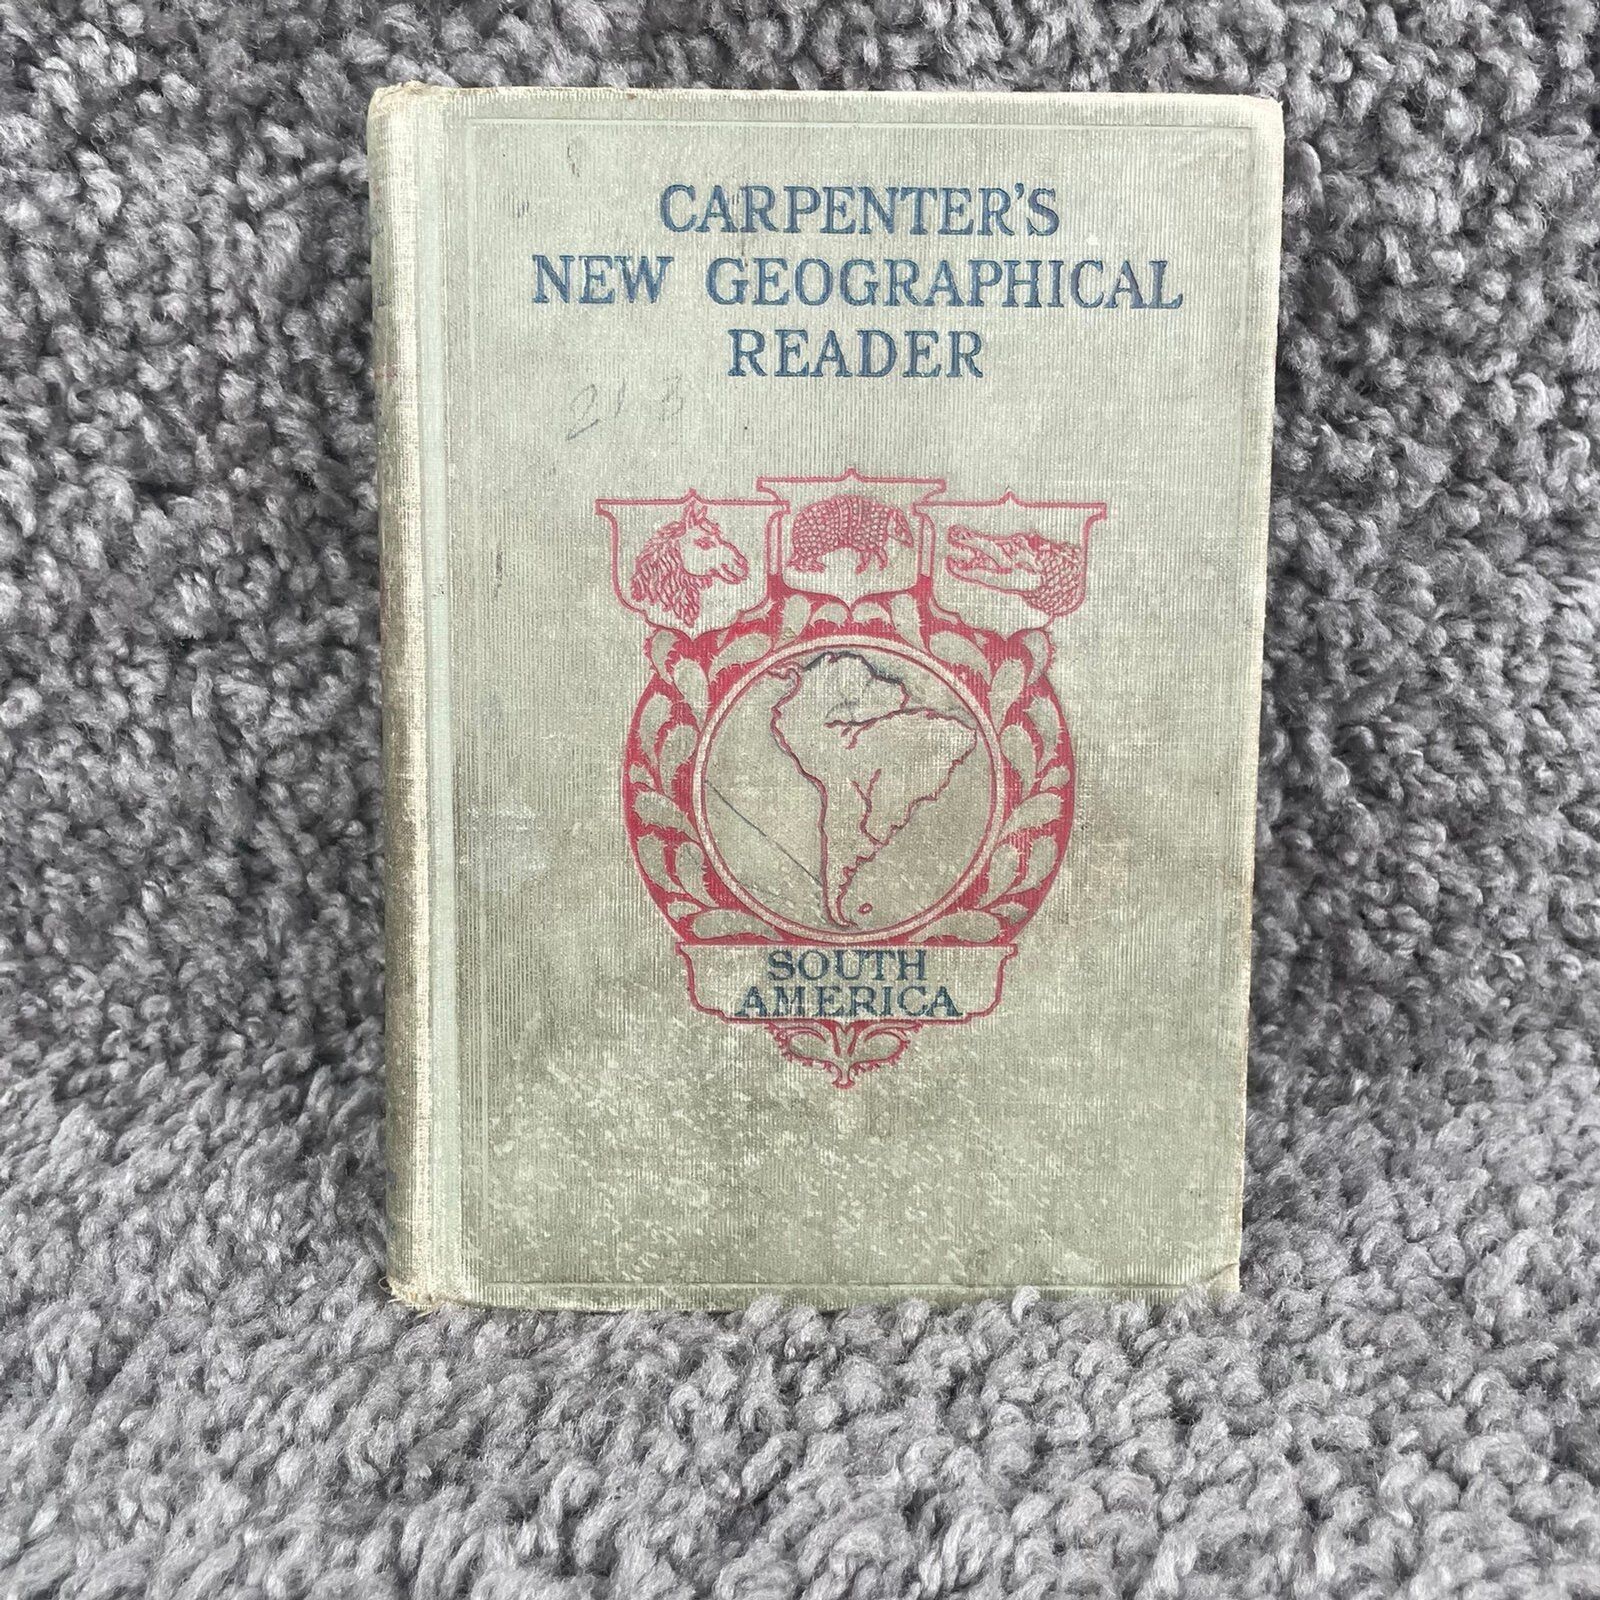 1899 Carpenter's New Geographical Reader SOUTH AMERICA antique book